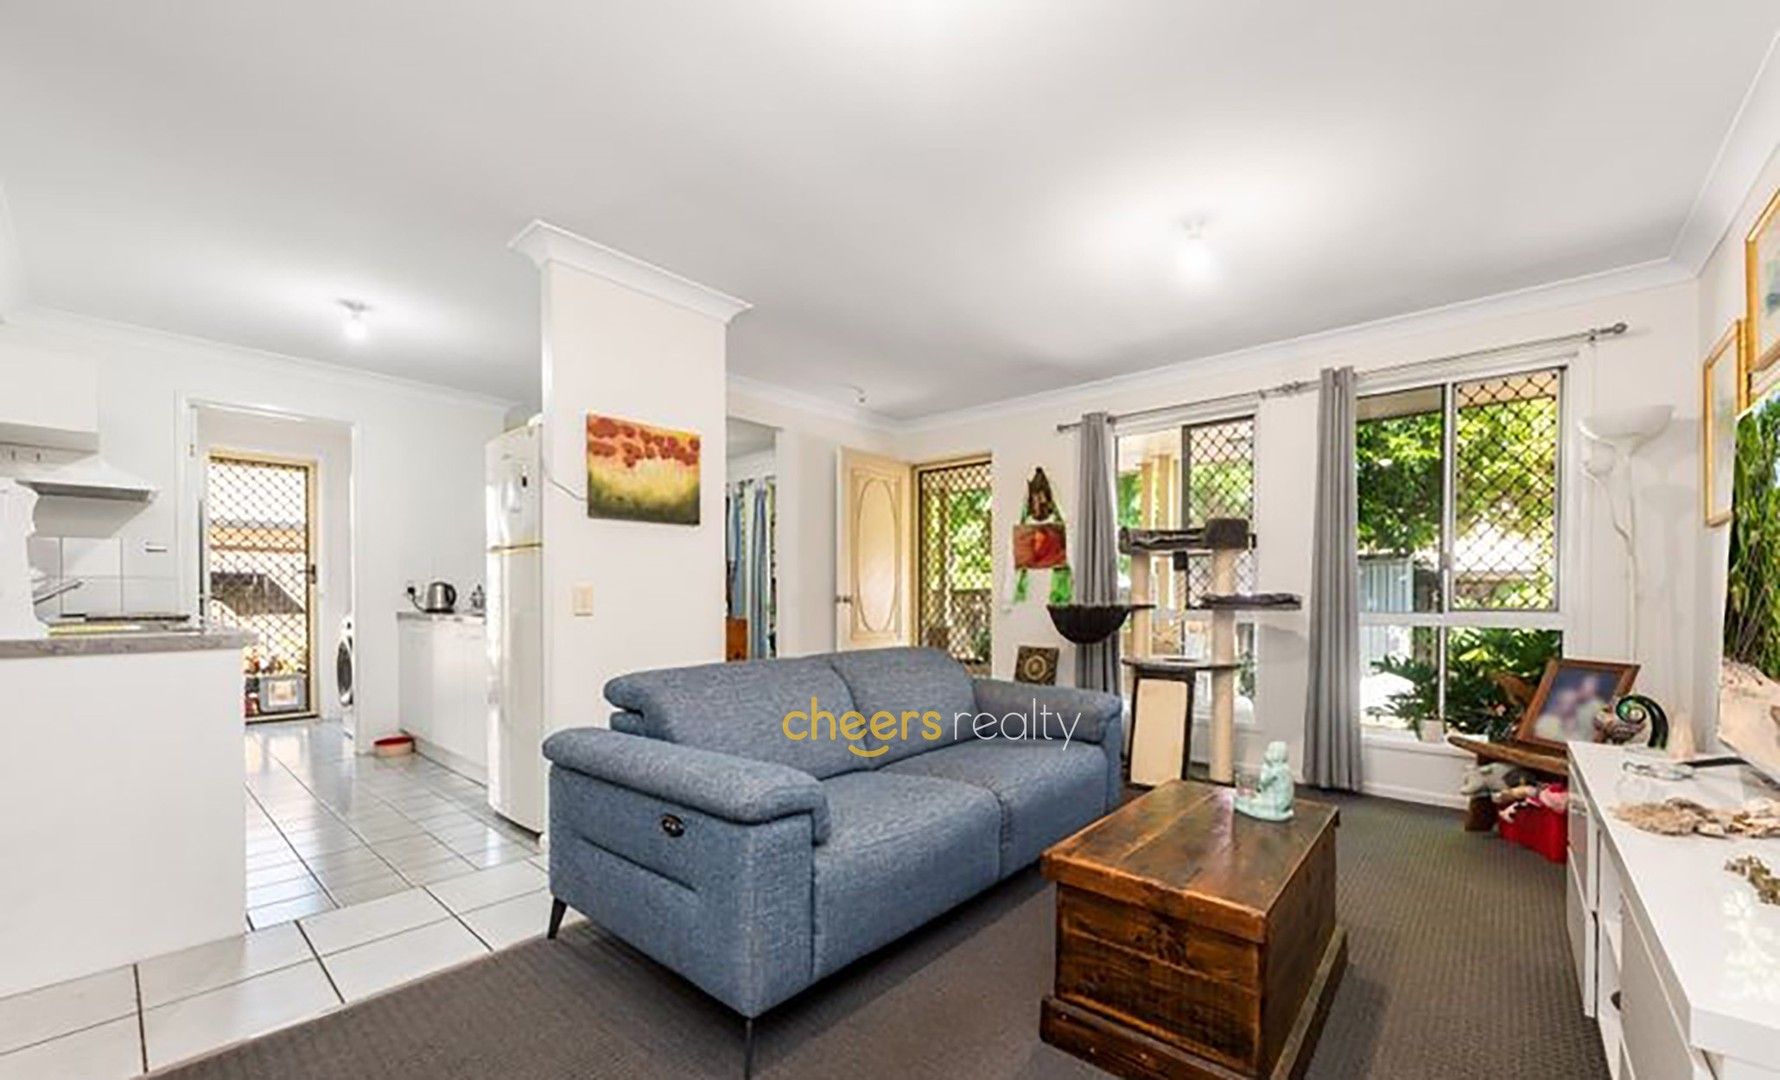 2 bedrooms Apartment / Unit / Flat in 3/21 Seeney St ZILLMERE QLD, 4034